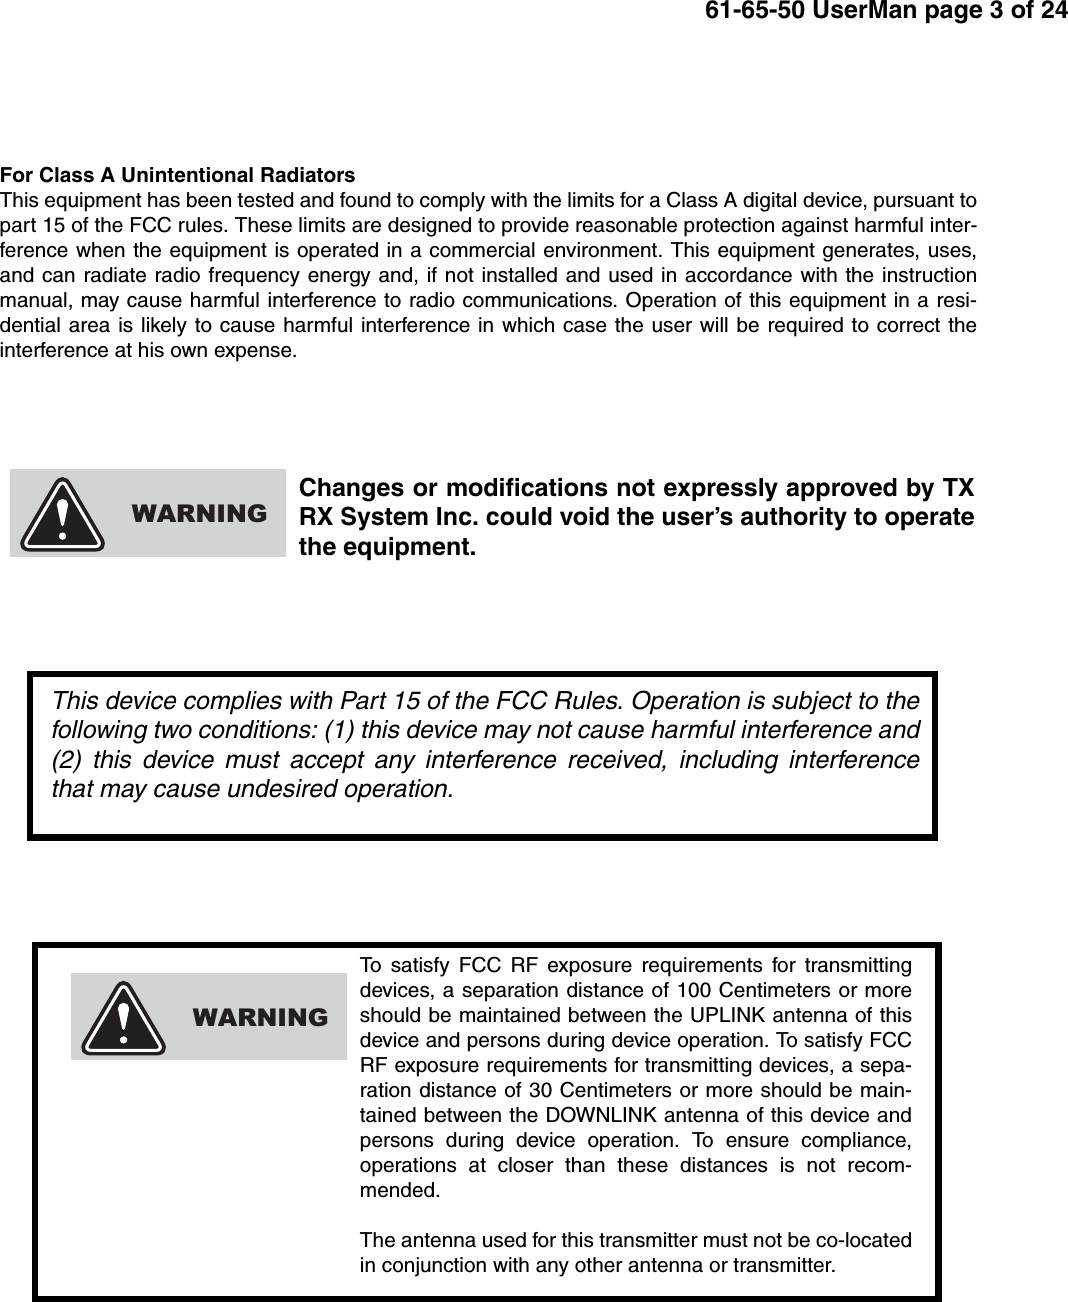 61-65-50 UserMan page 3 of 24To satisfy FCC RF exposure requirements for transmittingdevices, a separation distance of 100 Centimeters or moreshould be maintained between the UPLINK antenna of thisdevice and persons during device operation. To satisfy FCCRF exposure requirements for transmitting devices, a sepa-ration distance of 30 Centimeters or more should be main-tained between the DOWNLINK antenna of this device andpersons during device operation. To ensure compliance,operations at closer than these distances is not recom-mended.The antenna used for this transmitter must not be co-locatedin conjunction with any other antenna or transmitter.WARNINGFor Class A Unintentional RadiatorsThis equipment has been tested and found to comply with the limits for a Class A digital device, pursuant topart 15 of the FCC rules. These limits are designed to provide reasonable protection against harmful inter-ference when the equipment is operated in a commercial environment. This equipment generates, uses,and can radiate radio frequency energy and, if not installed and used in accordance with the instructionmanual, may cause harmful interference to radio communications. Operation of this equipment in a resi-dential area is likely to cause harmful interference in which case the user will be required to correct theinterference at his own expense.Changes or modifications not expressly approved by TXRX System Inc. could void the user’s authority to operatethe equipment.WARNINGThis device complies with Part 15 of the FCC Rules. Operation is subject to thefollowing two conditions: (1) this device may not cause harmful interference and(2) this device must accept any interference received, including interferencethat may cause undesired operation.